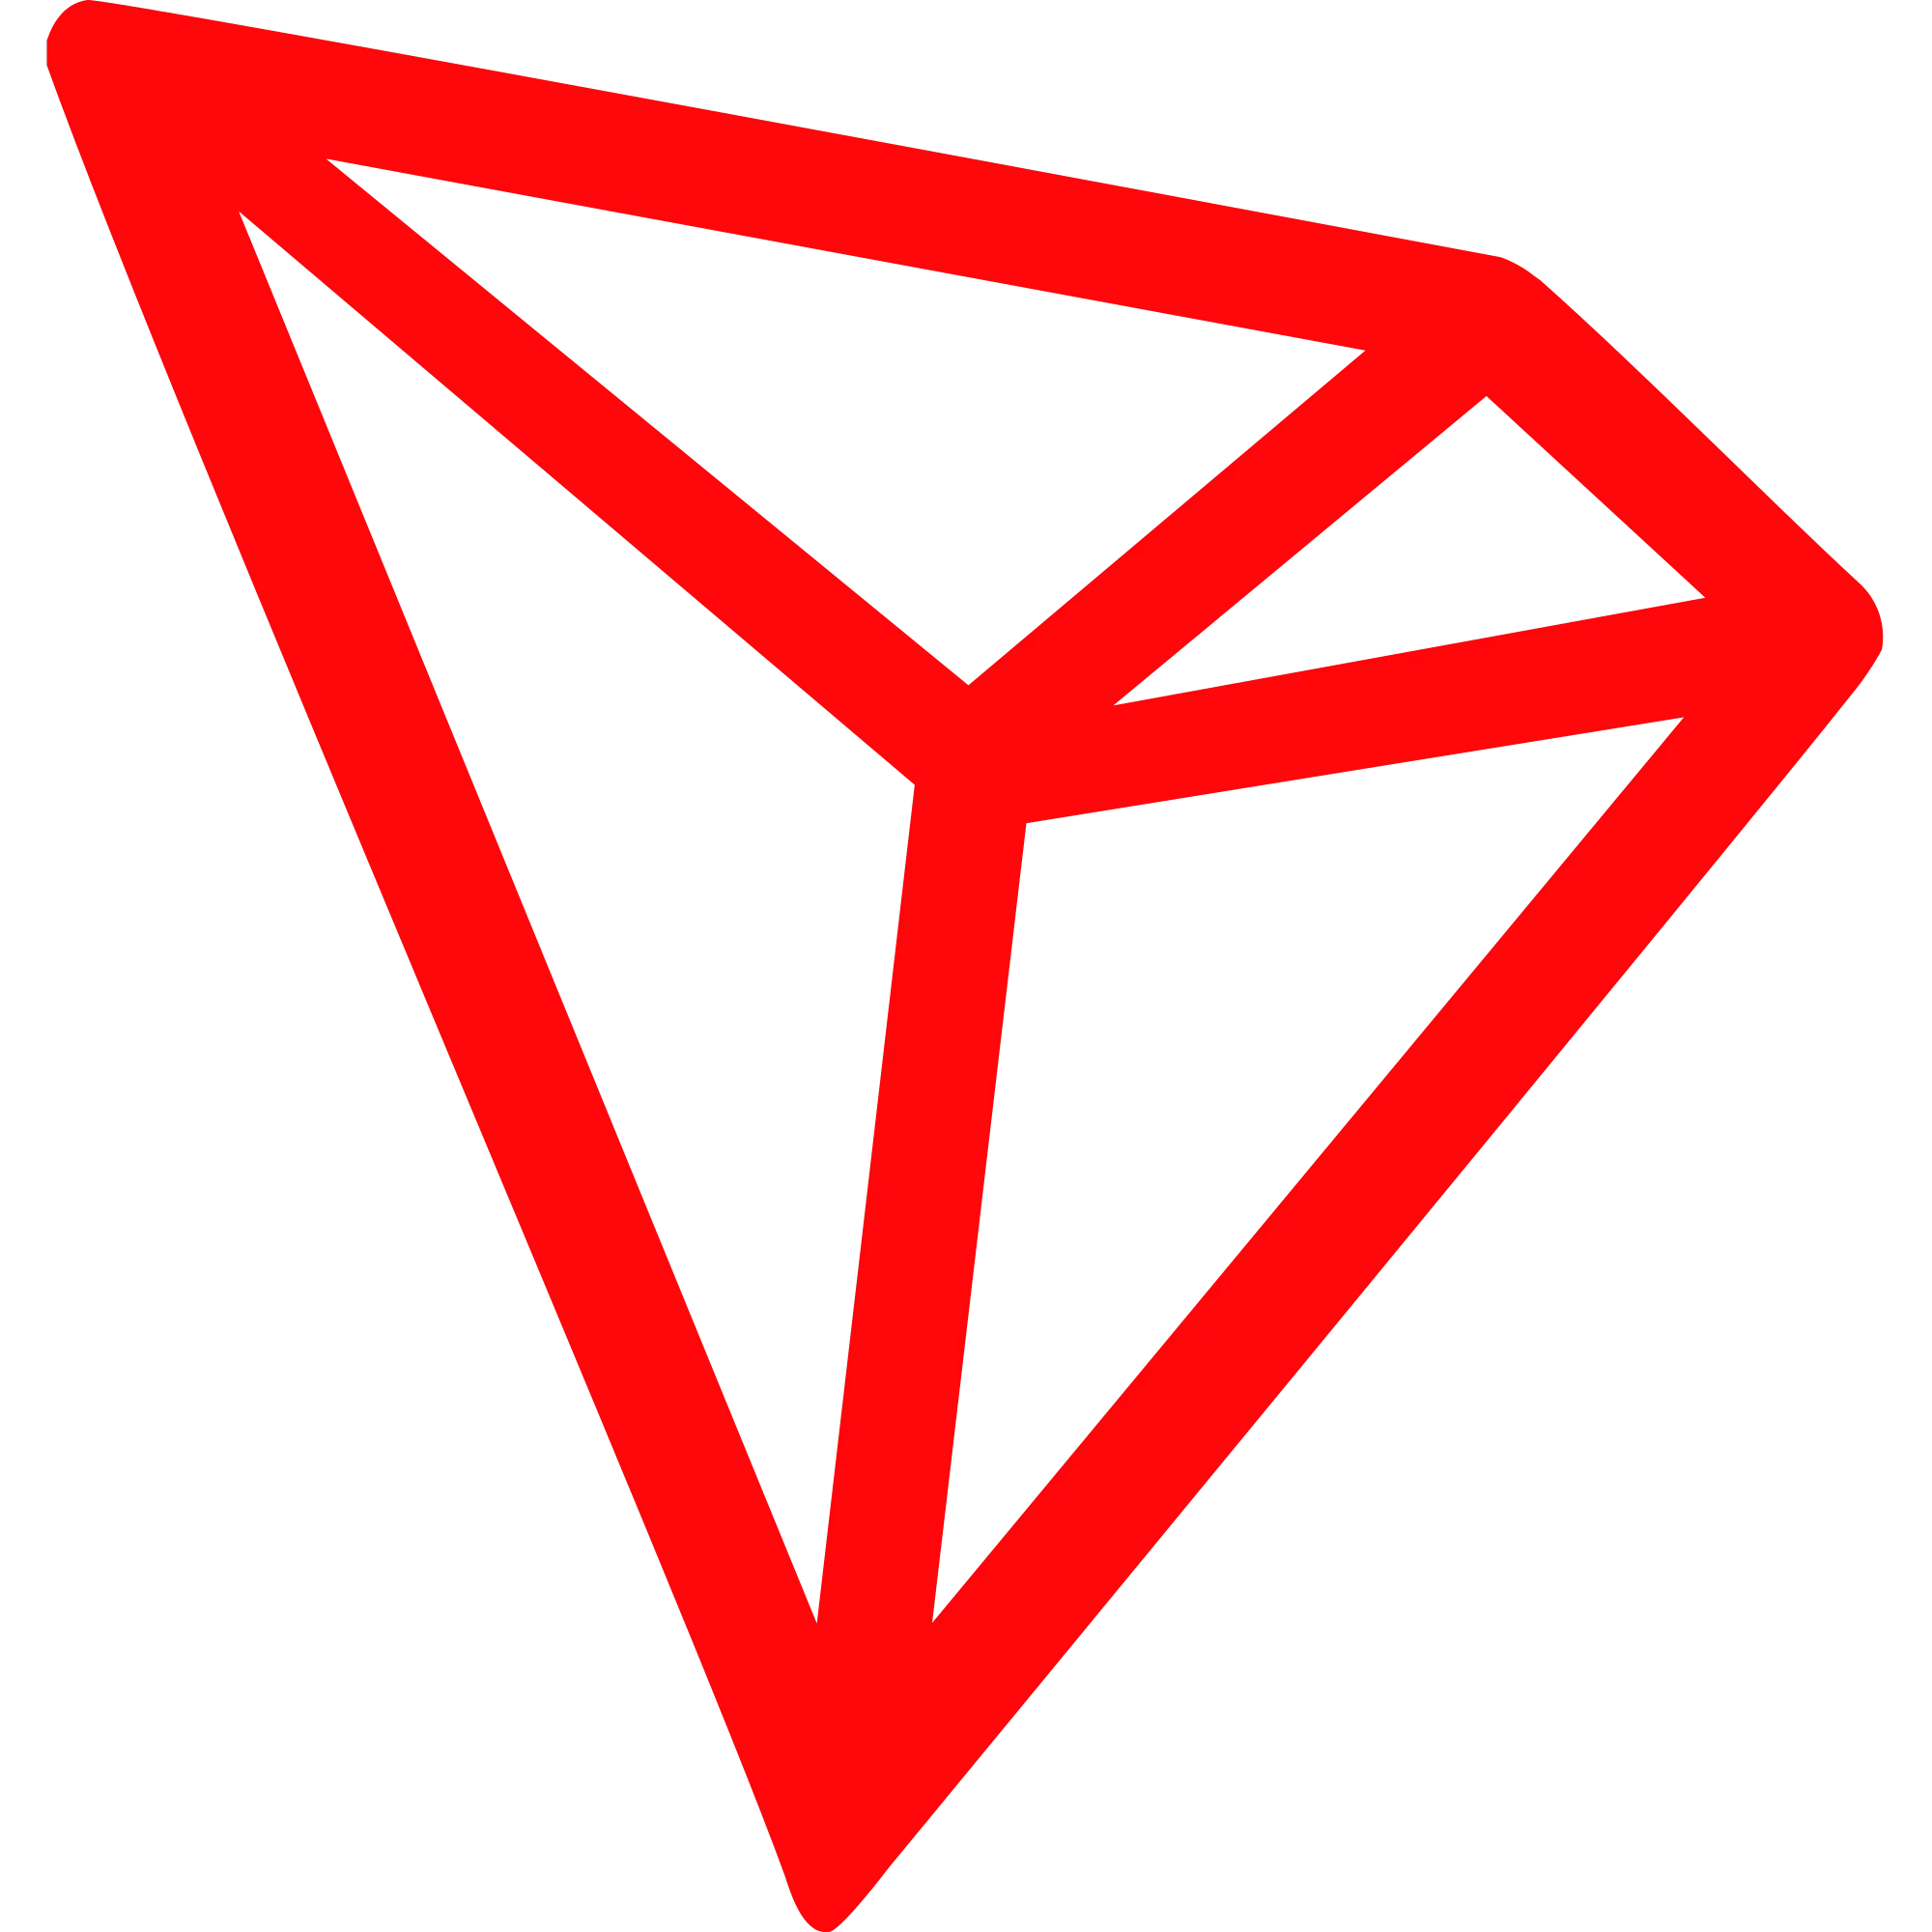 TRON logo in png format